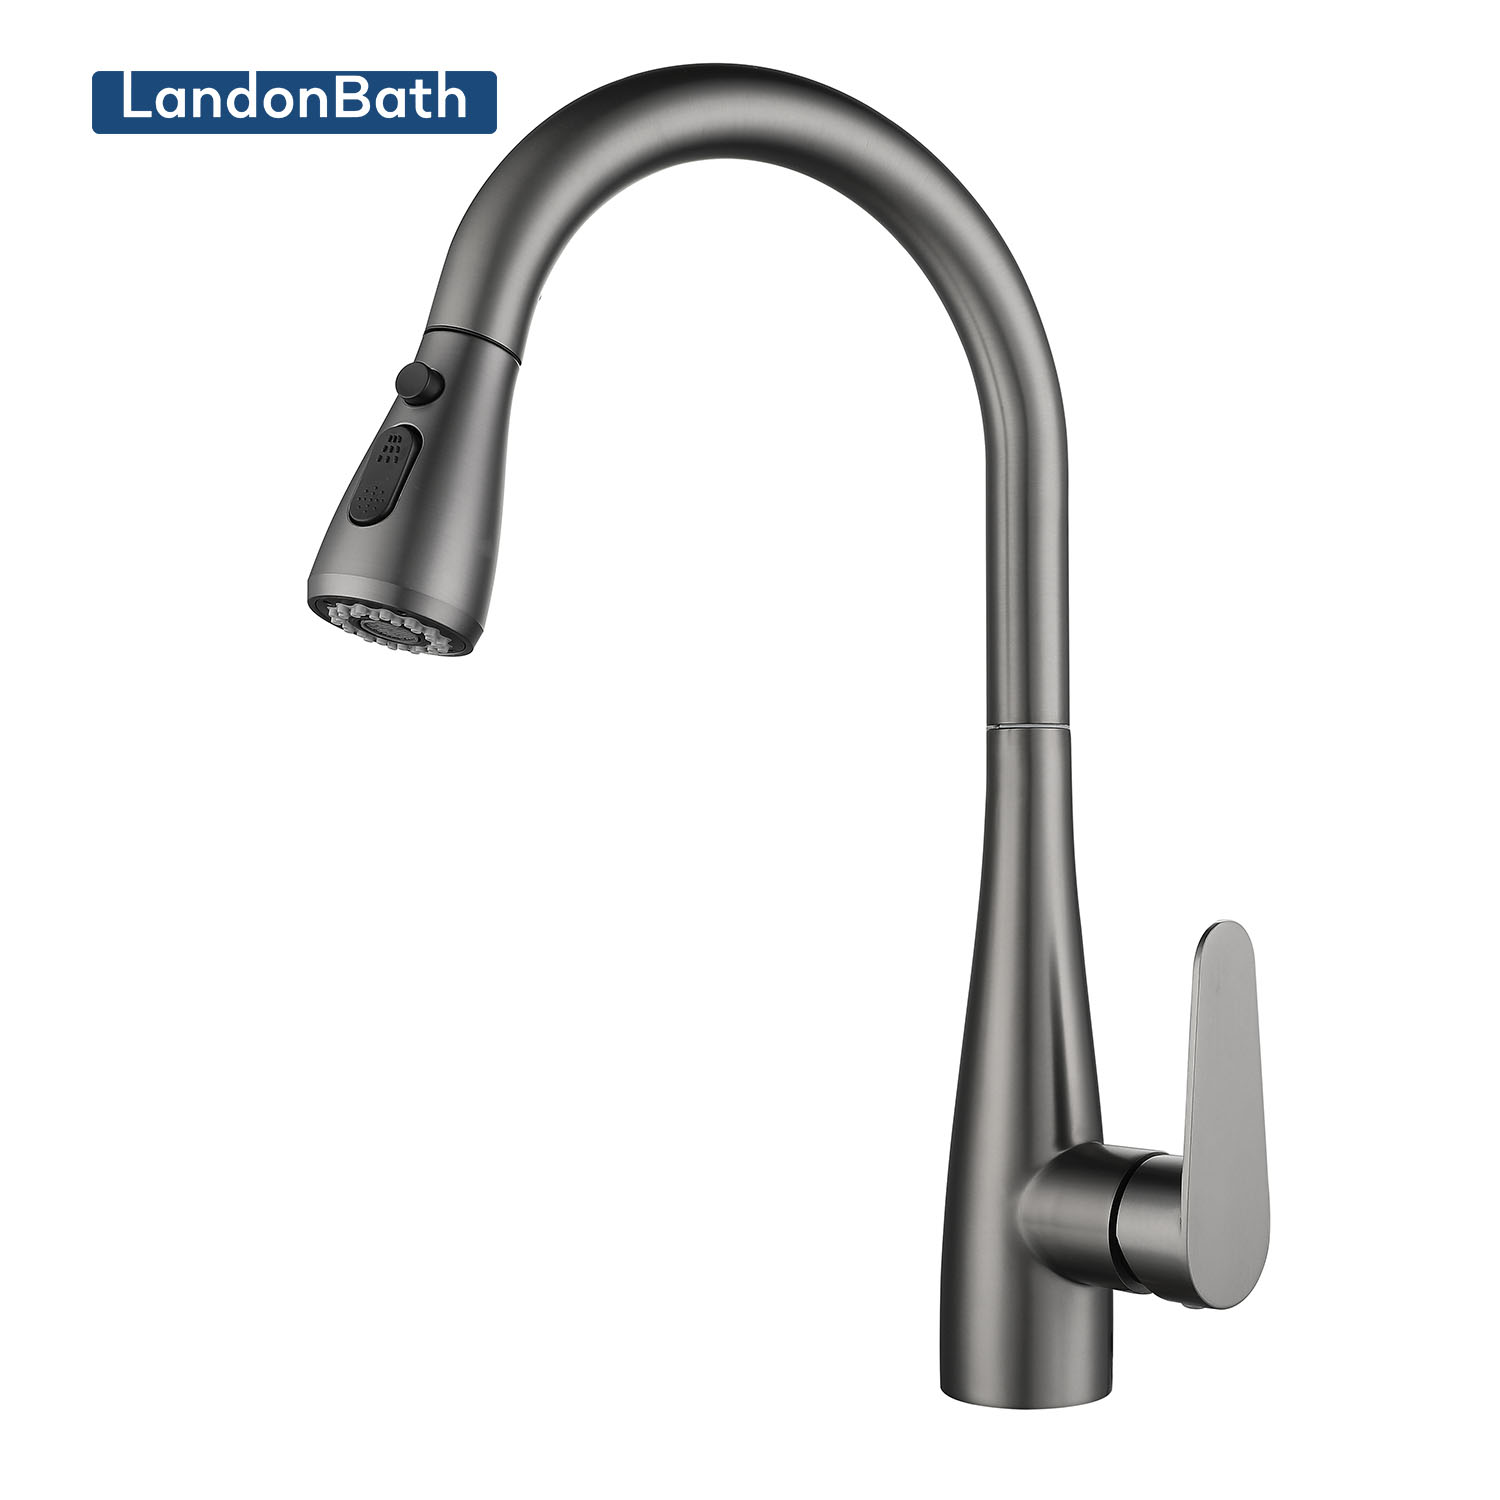 Luxury Fashion Design Pull Out Spray Kitchen Faucet ,Brass Pull Down Kitchen Sink Faucet